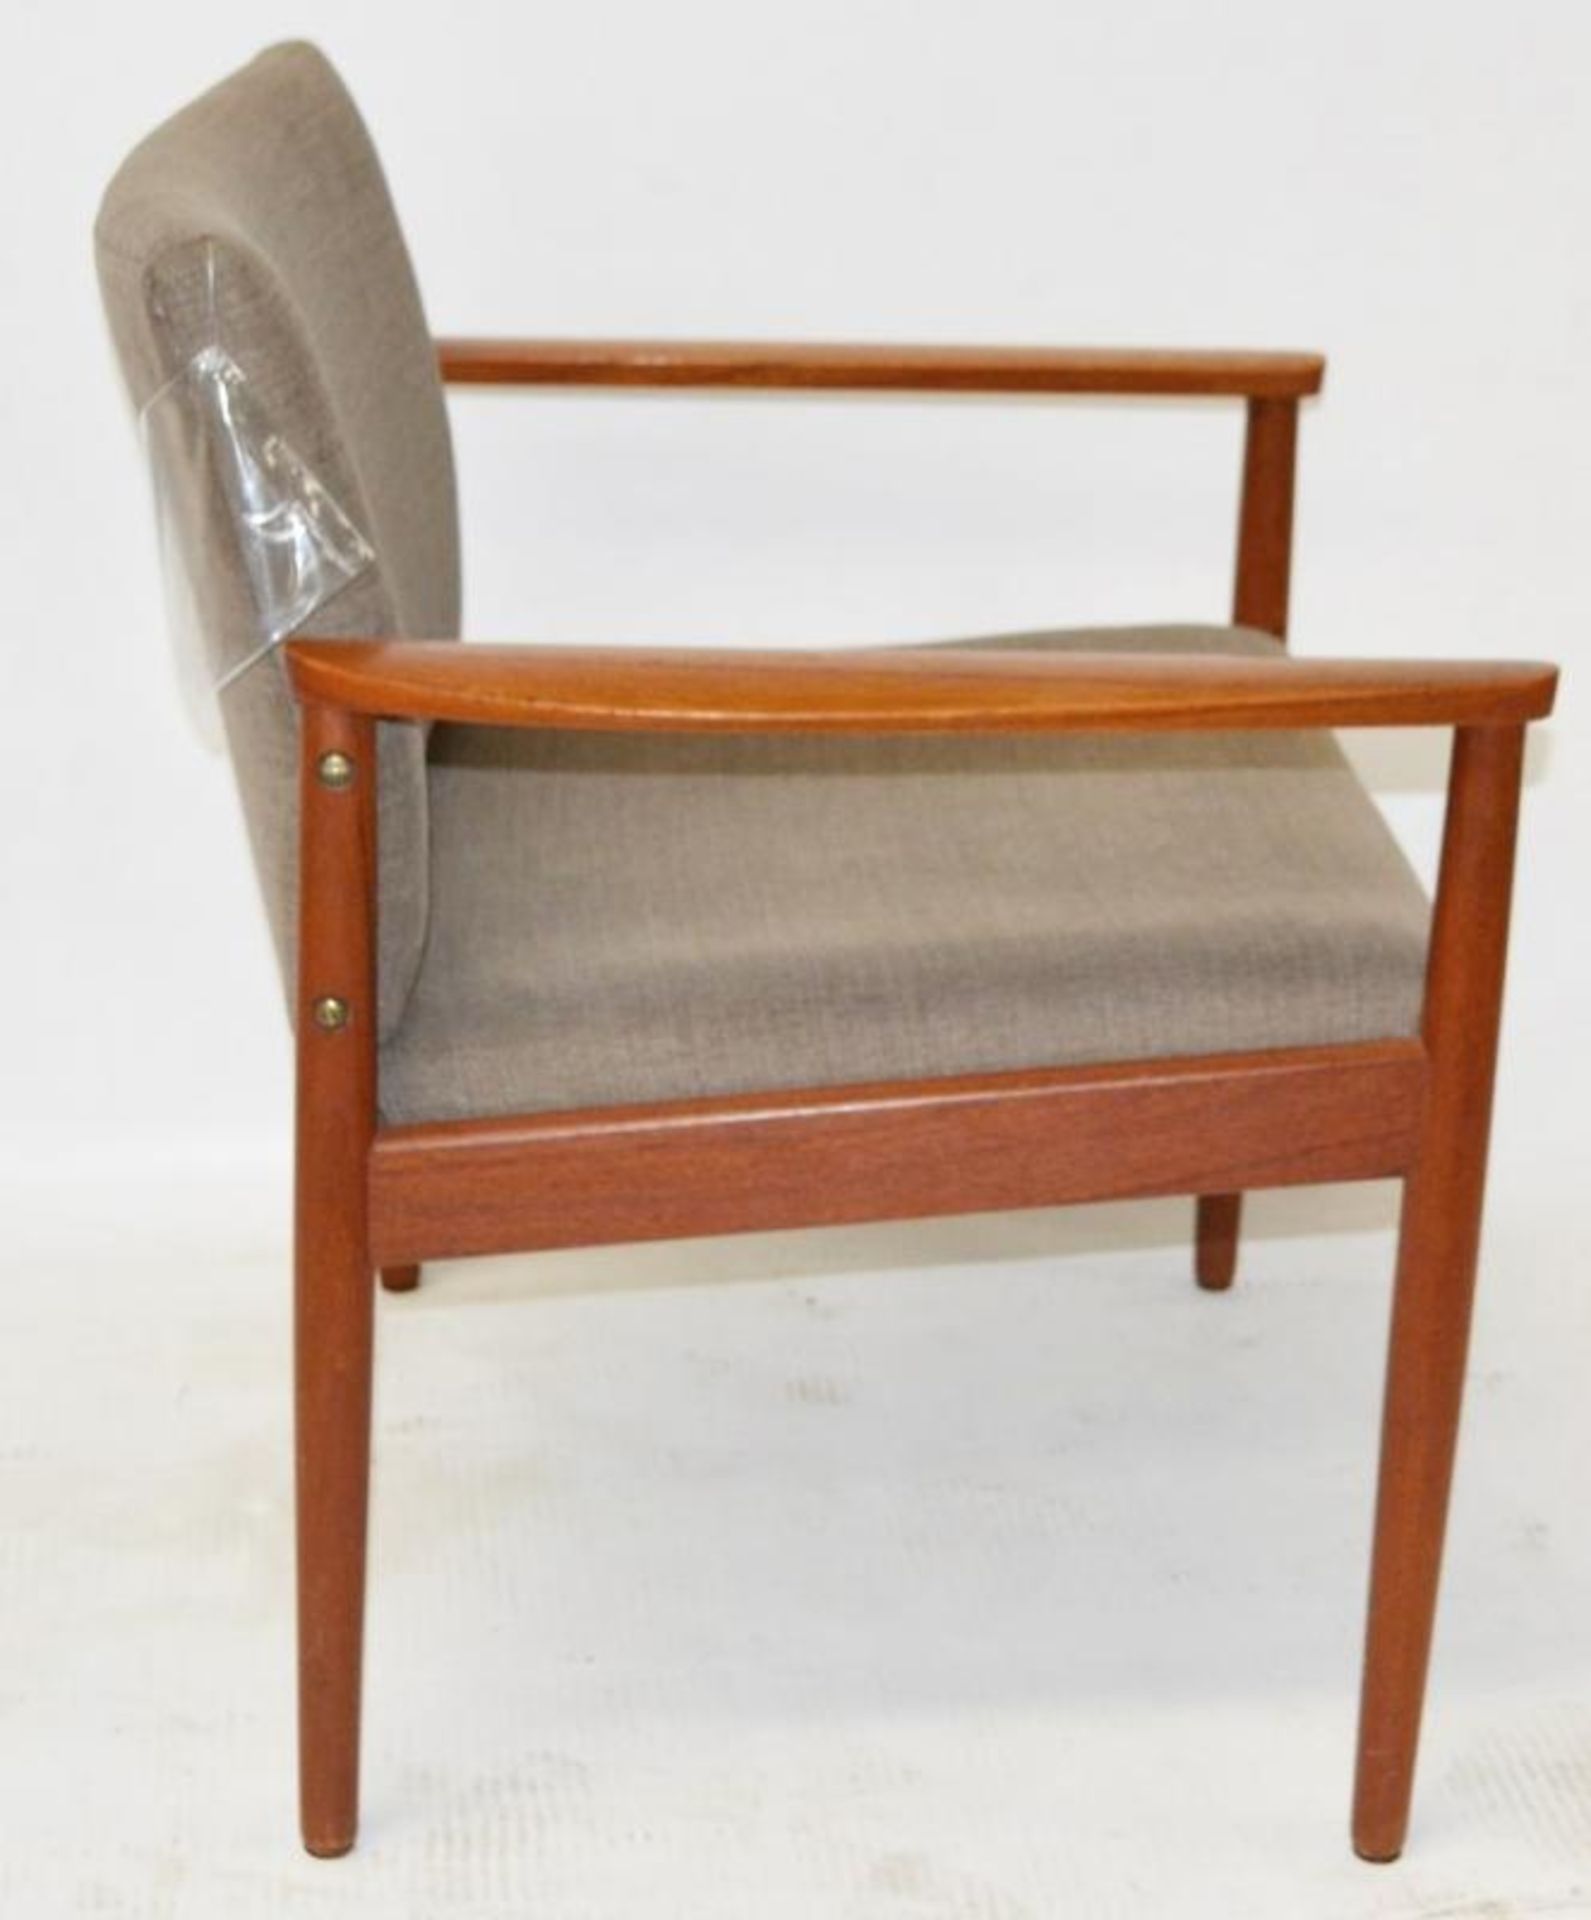 1 x JAB King Upholstery Mid Century Chair Hot Madison Reloaded Fab - Dimensions (approx): W68 x D57, - Image 5 of 6